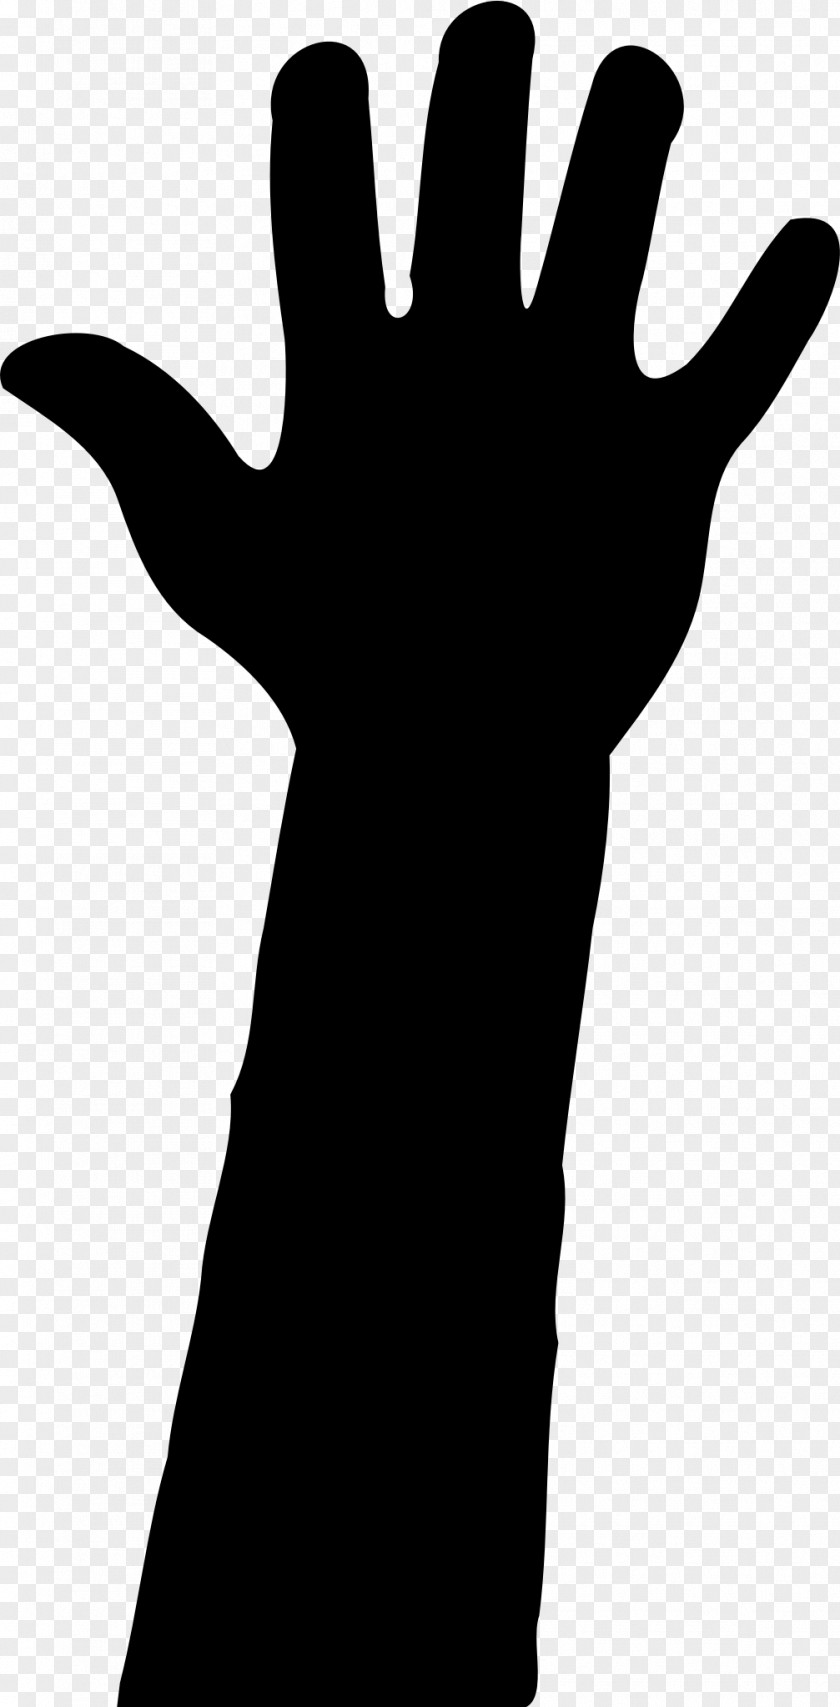 Raise Hand Silhouette Drawing Clip Art PNG